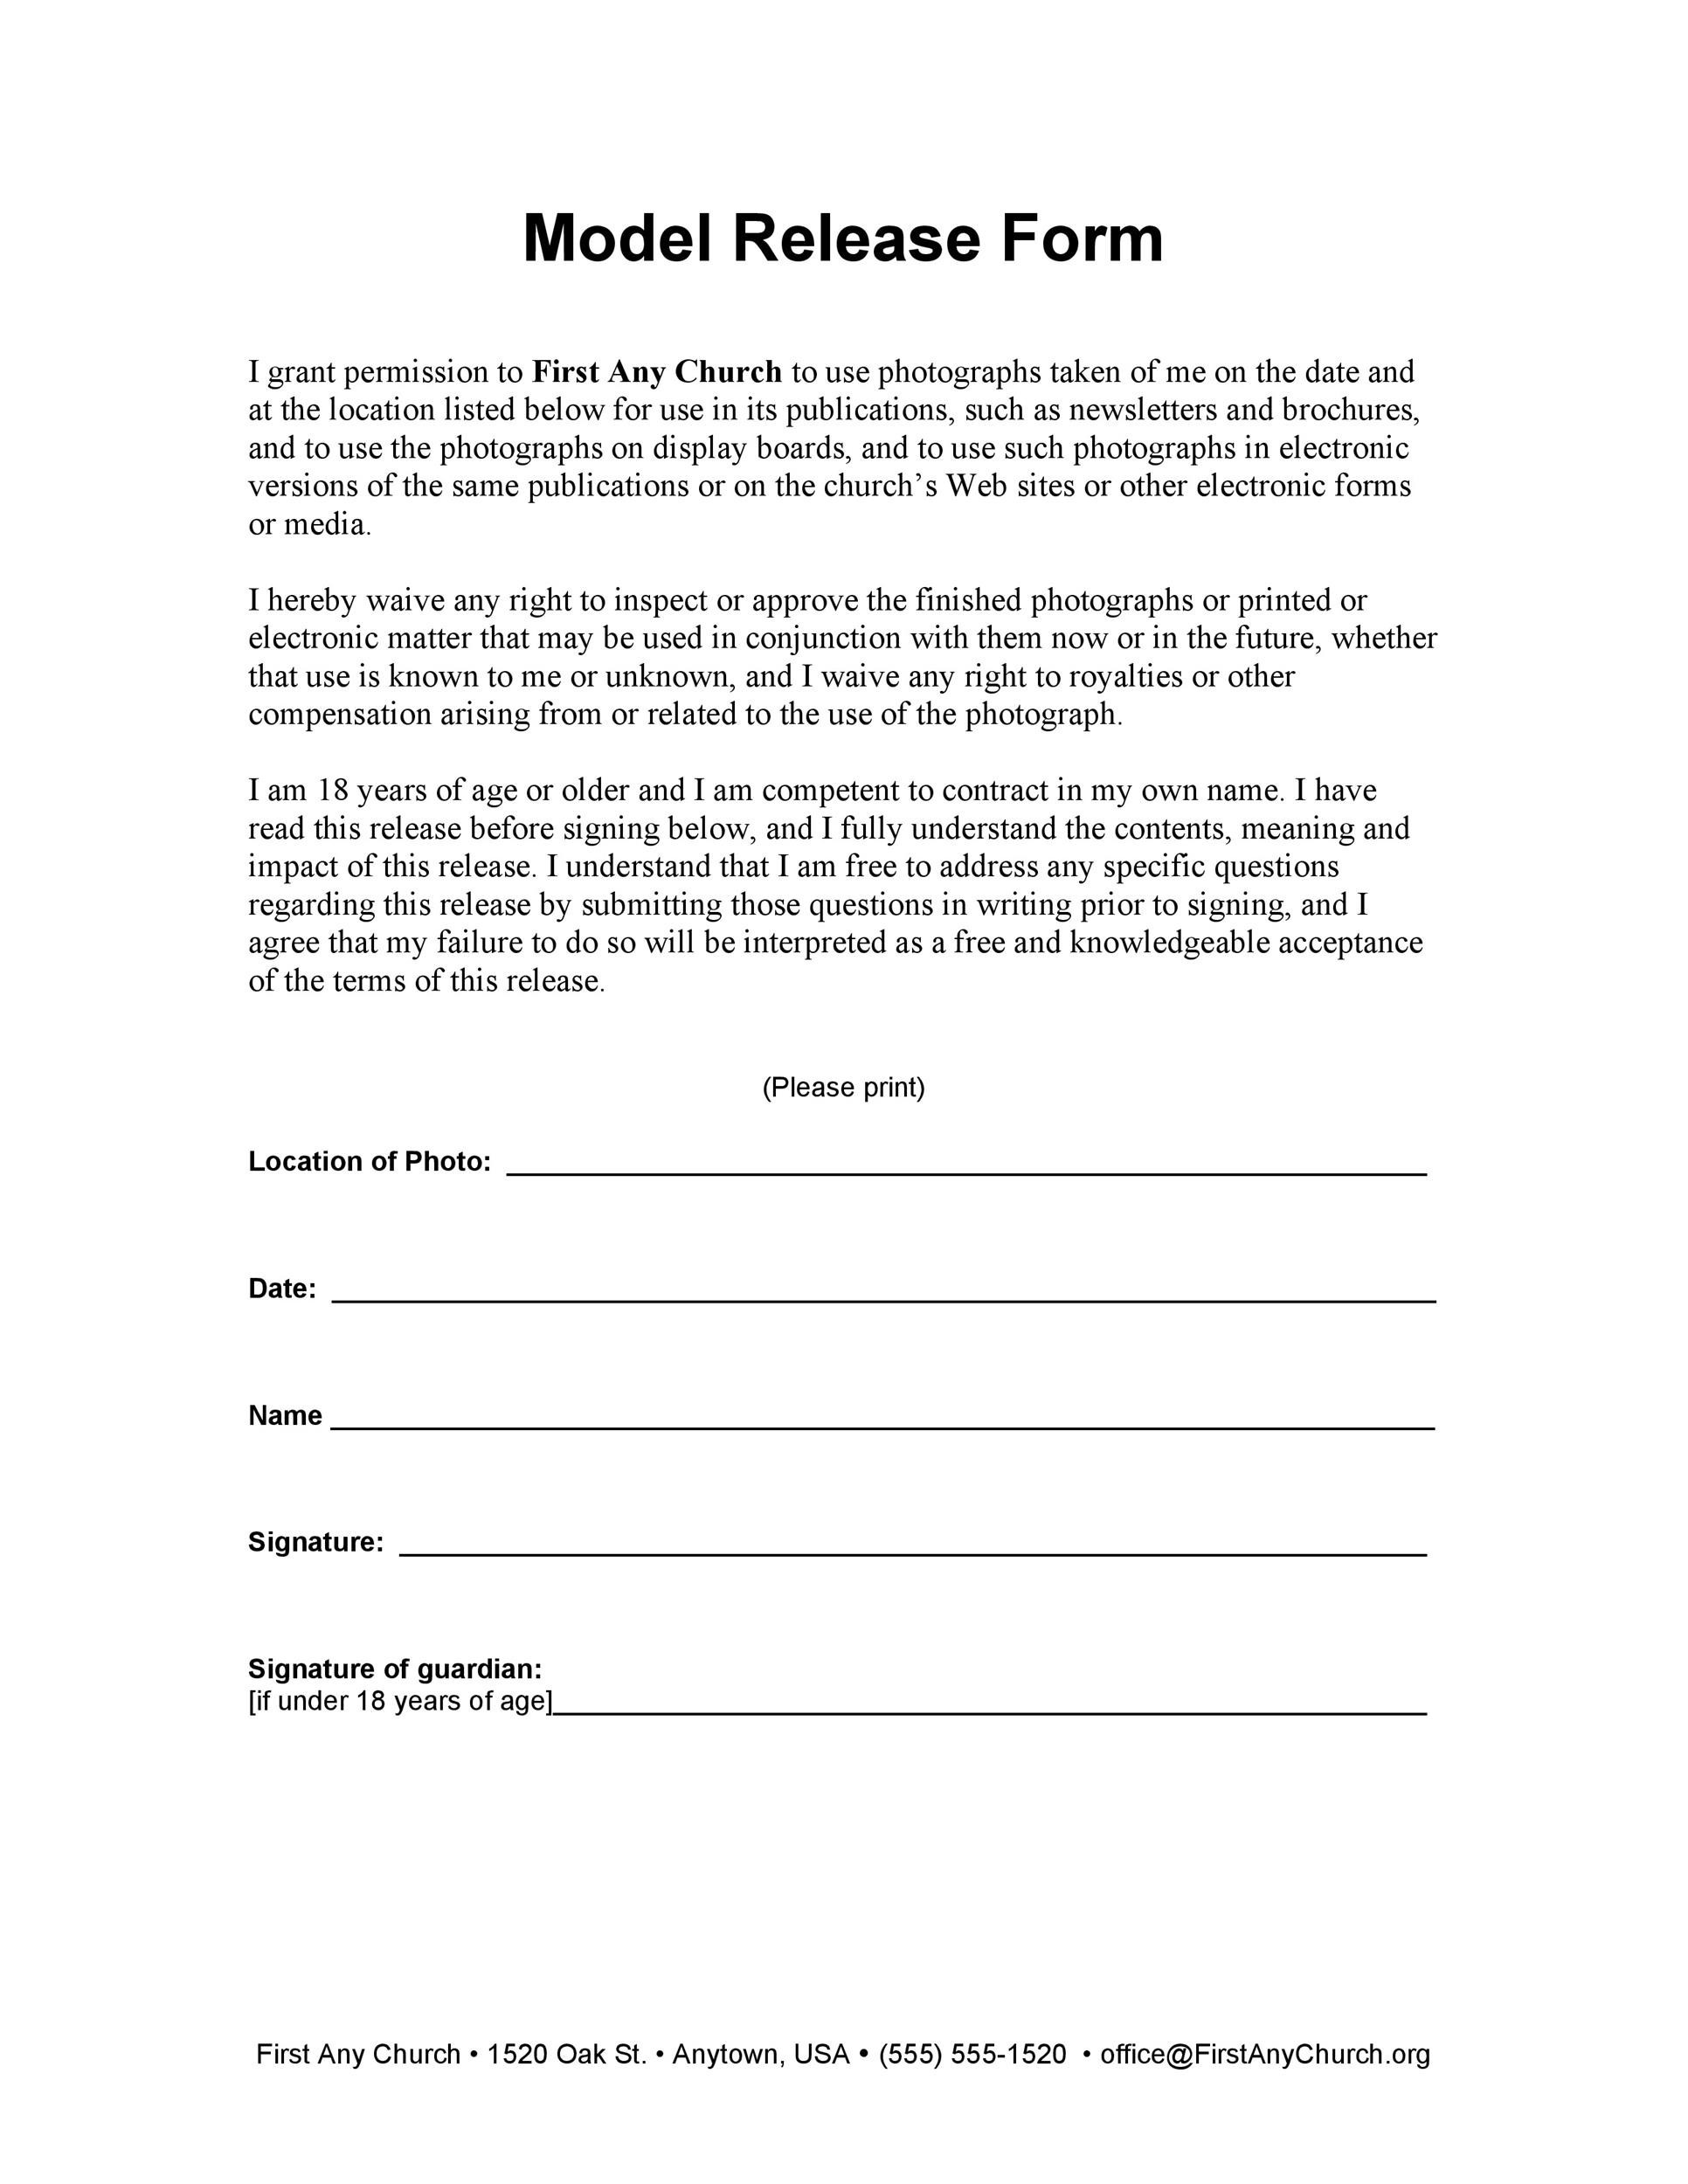 Model Release form Template 50 Best Model Release forms Free Templates Templatelab